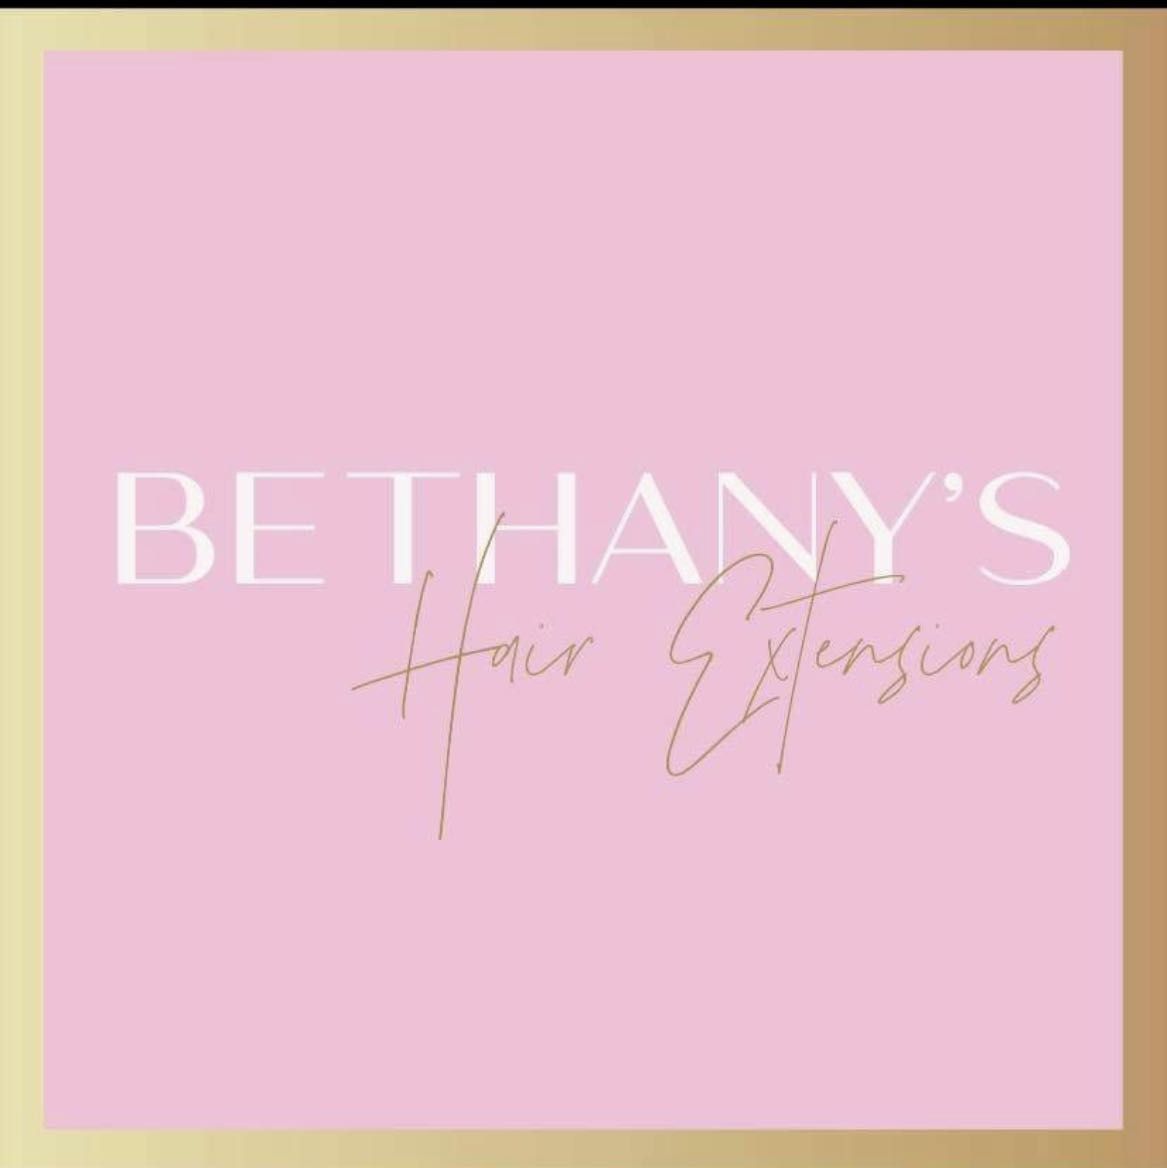 Bethanys Hair Extensions, 14A Rosemount Avenue, Londonderry